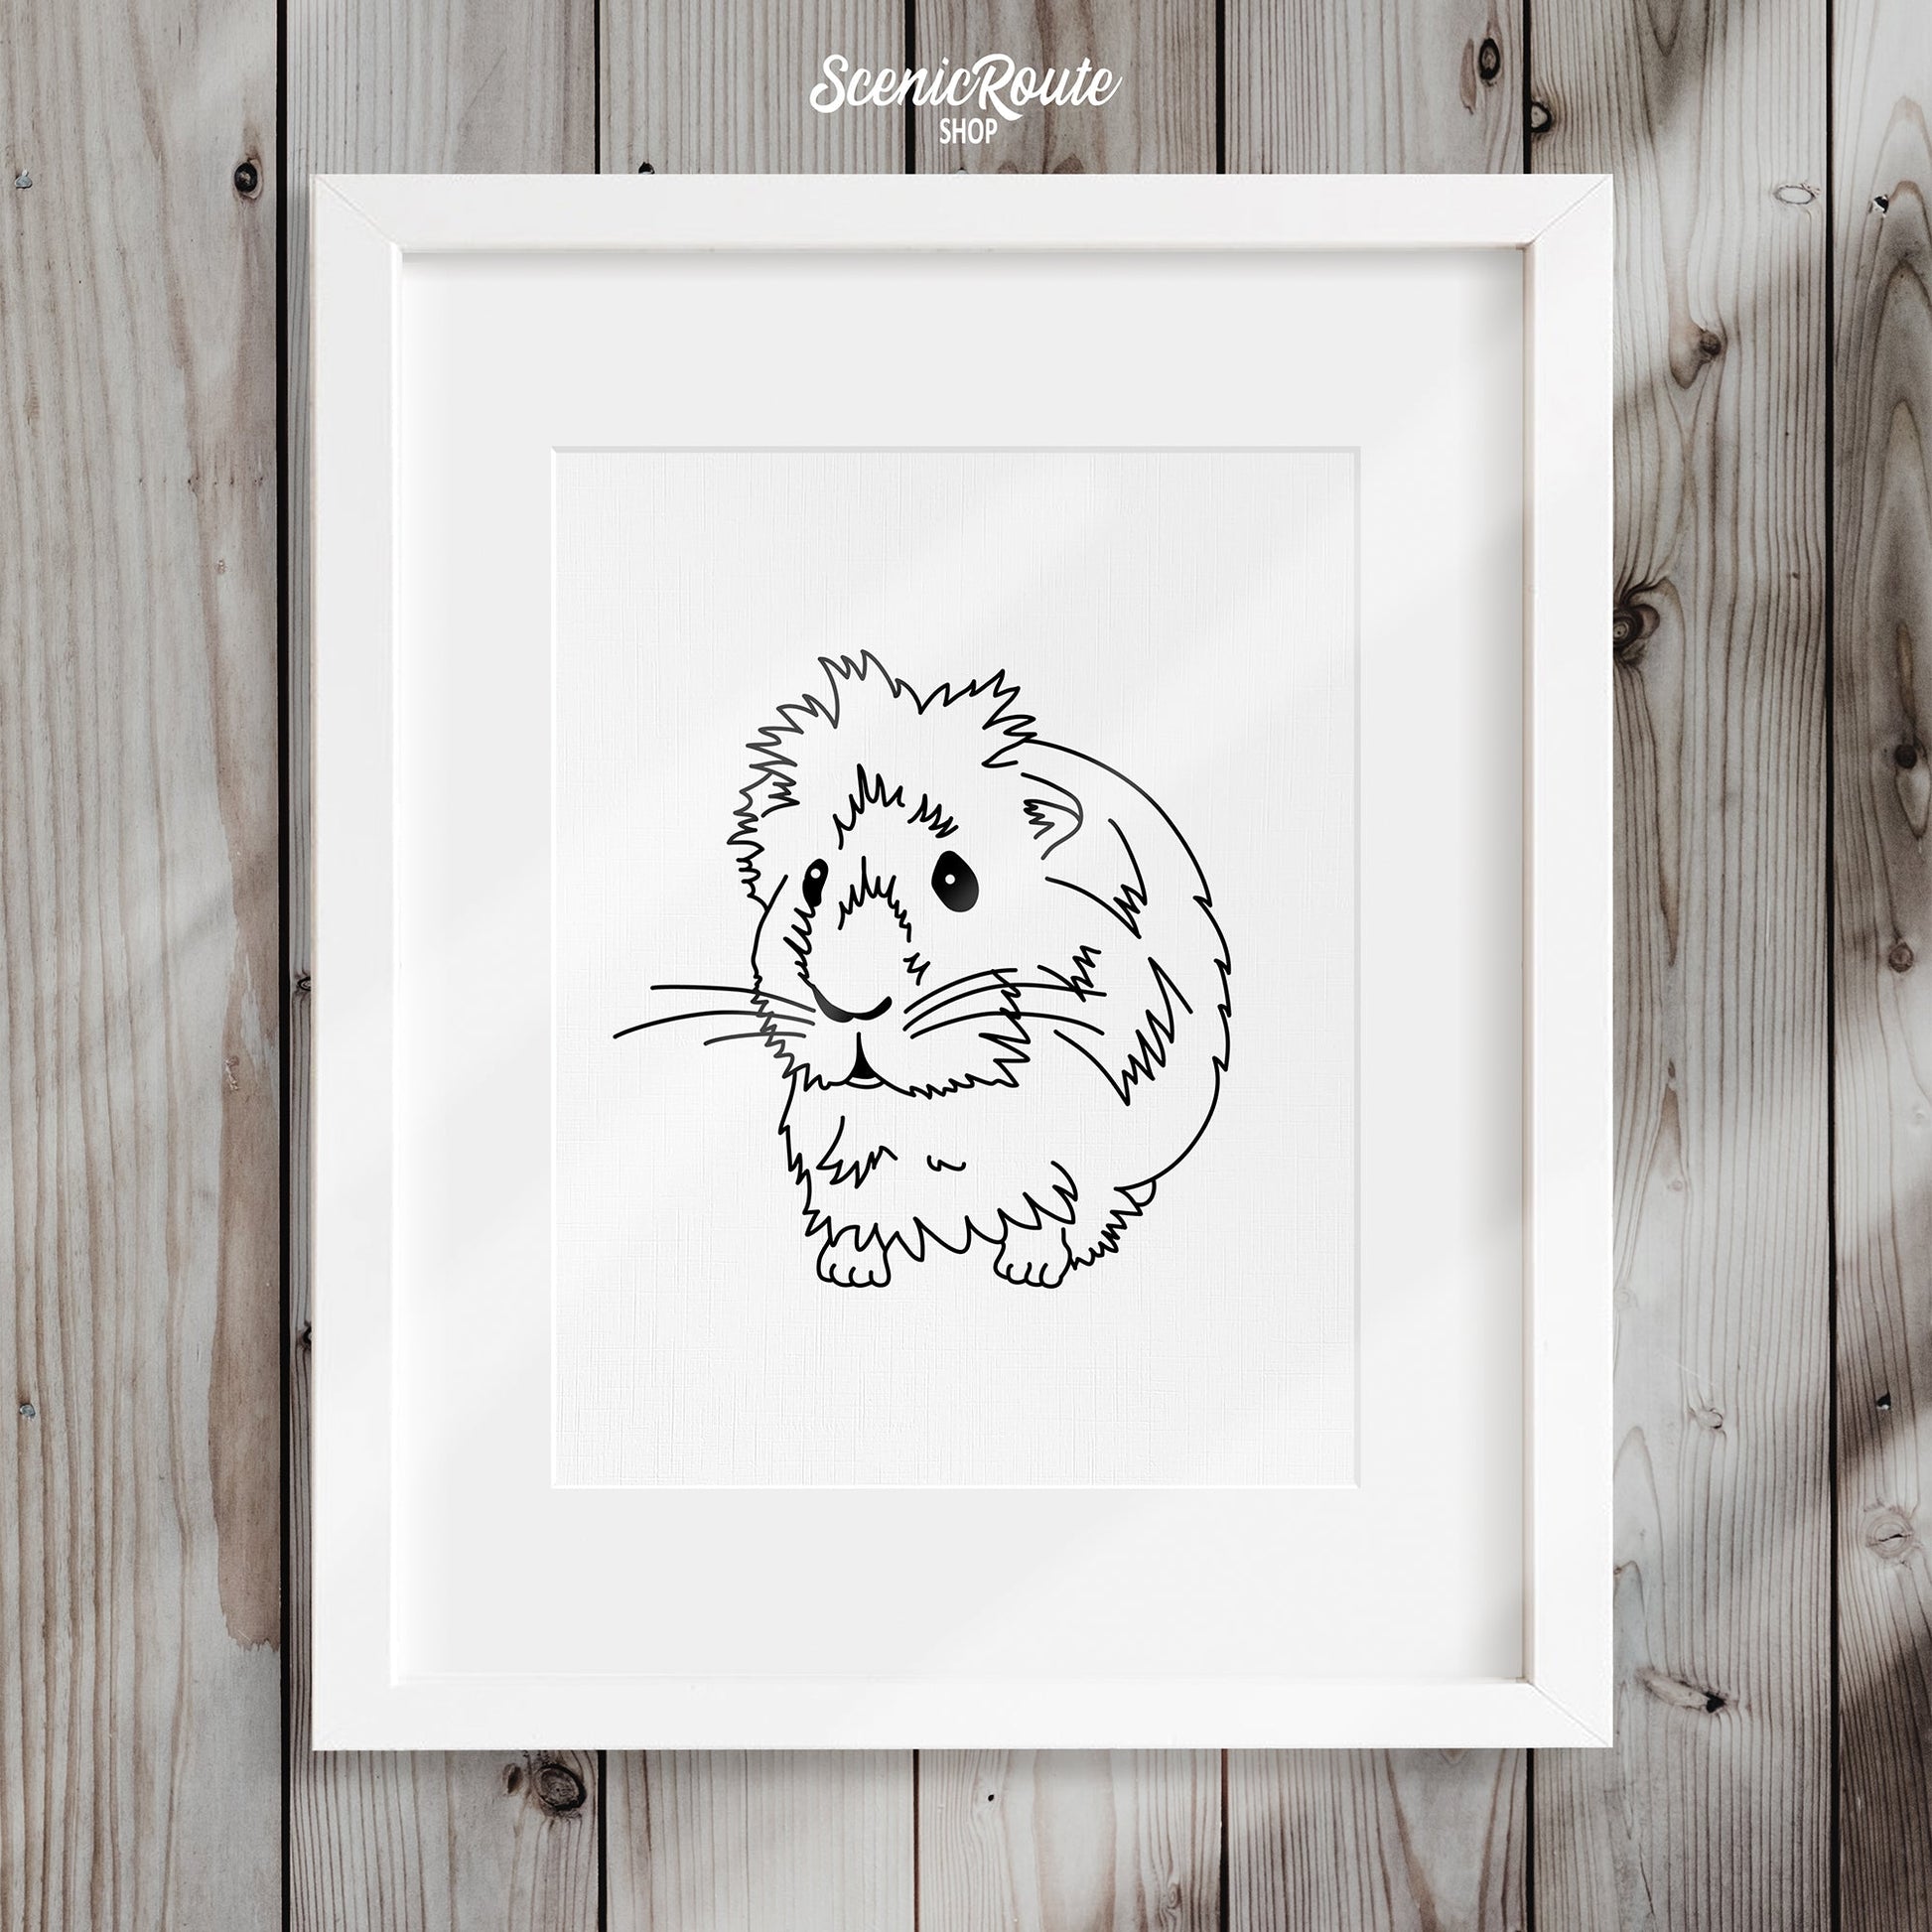 A framed line art drawing of a Guinea Pig on a wood wall